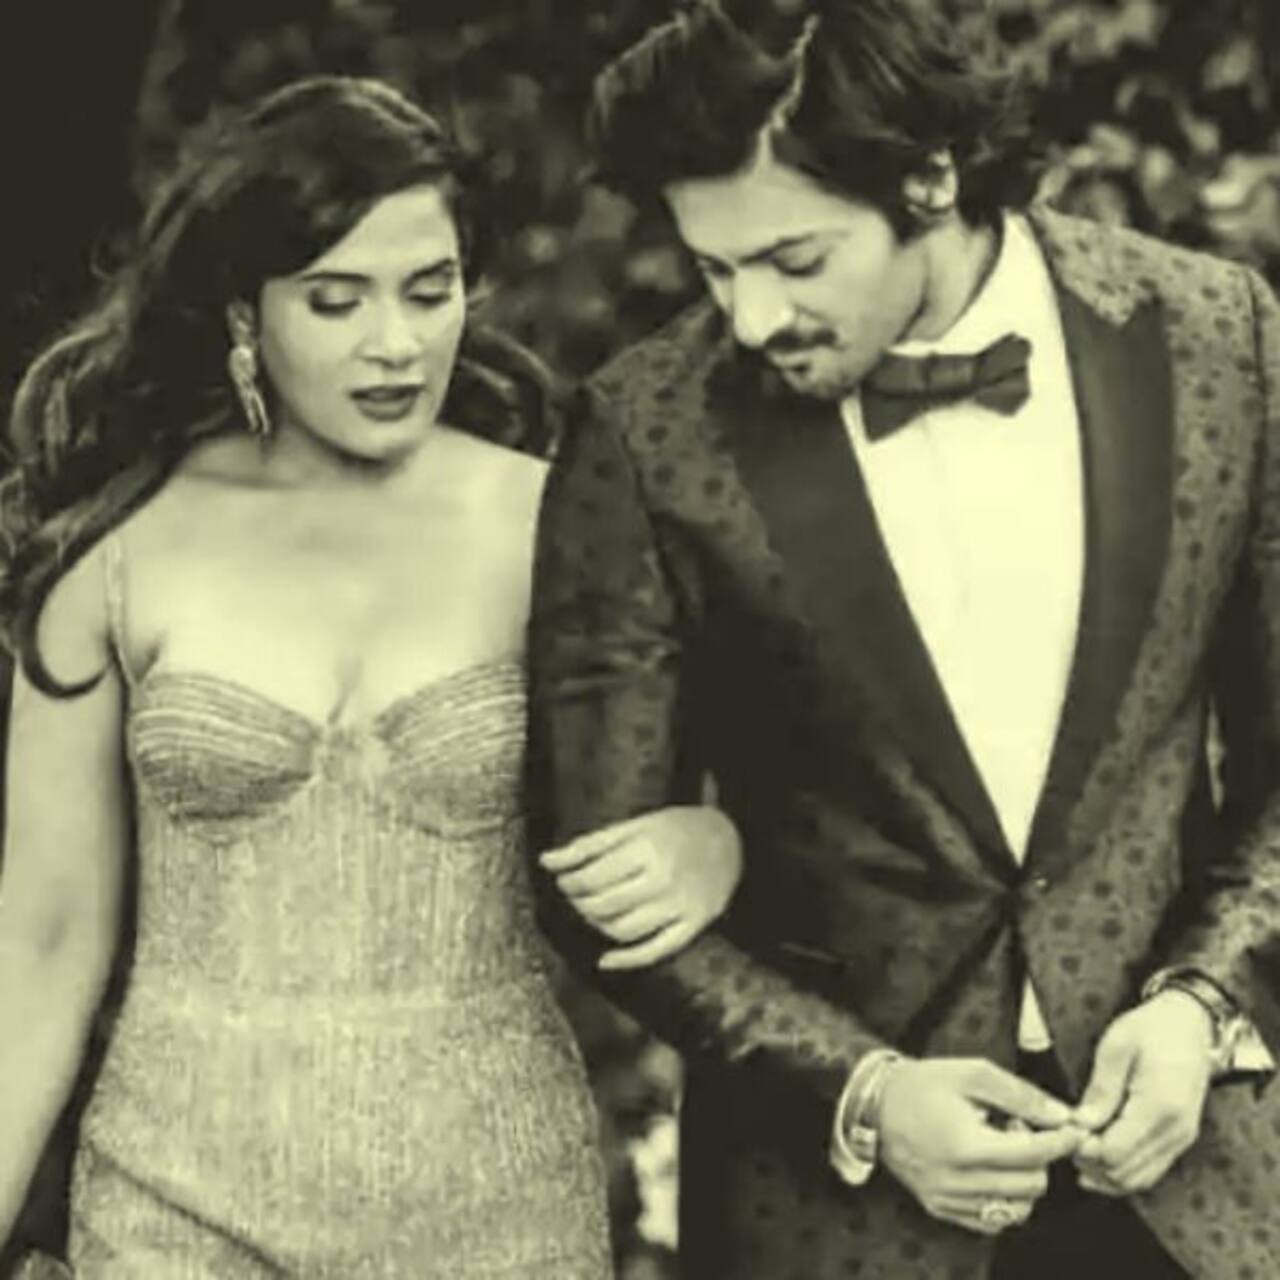 Ali Fazal on tying the knot with Richa Chadha: I'm definitely not getting married in a year that has two zeros and two twos